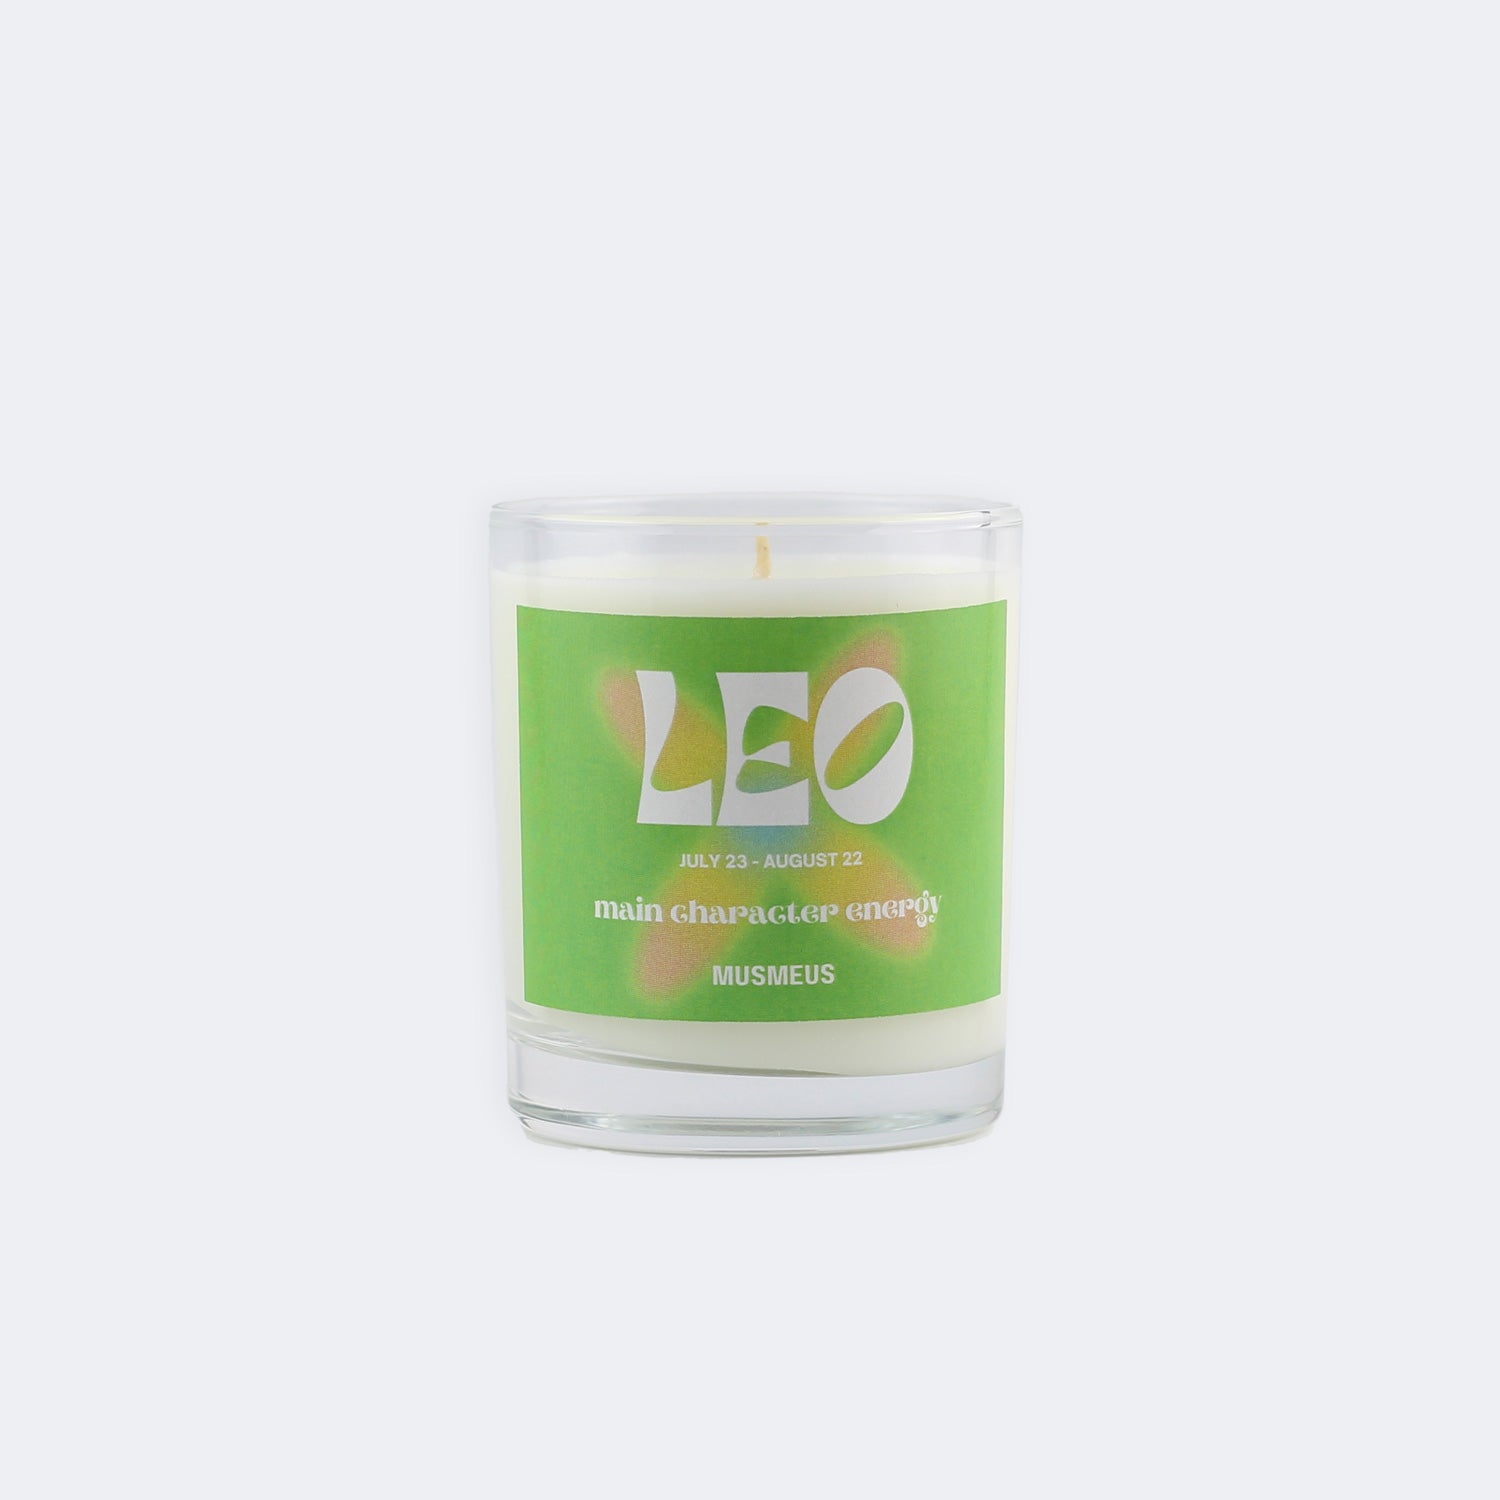 Leo Soy Wax Scented Candle